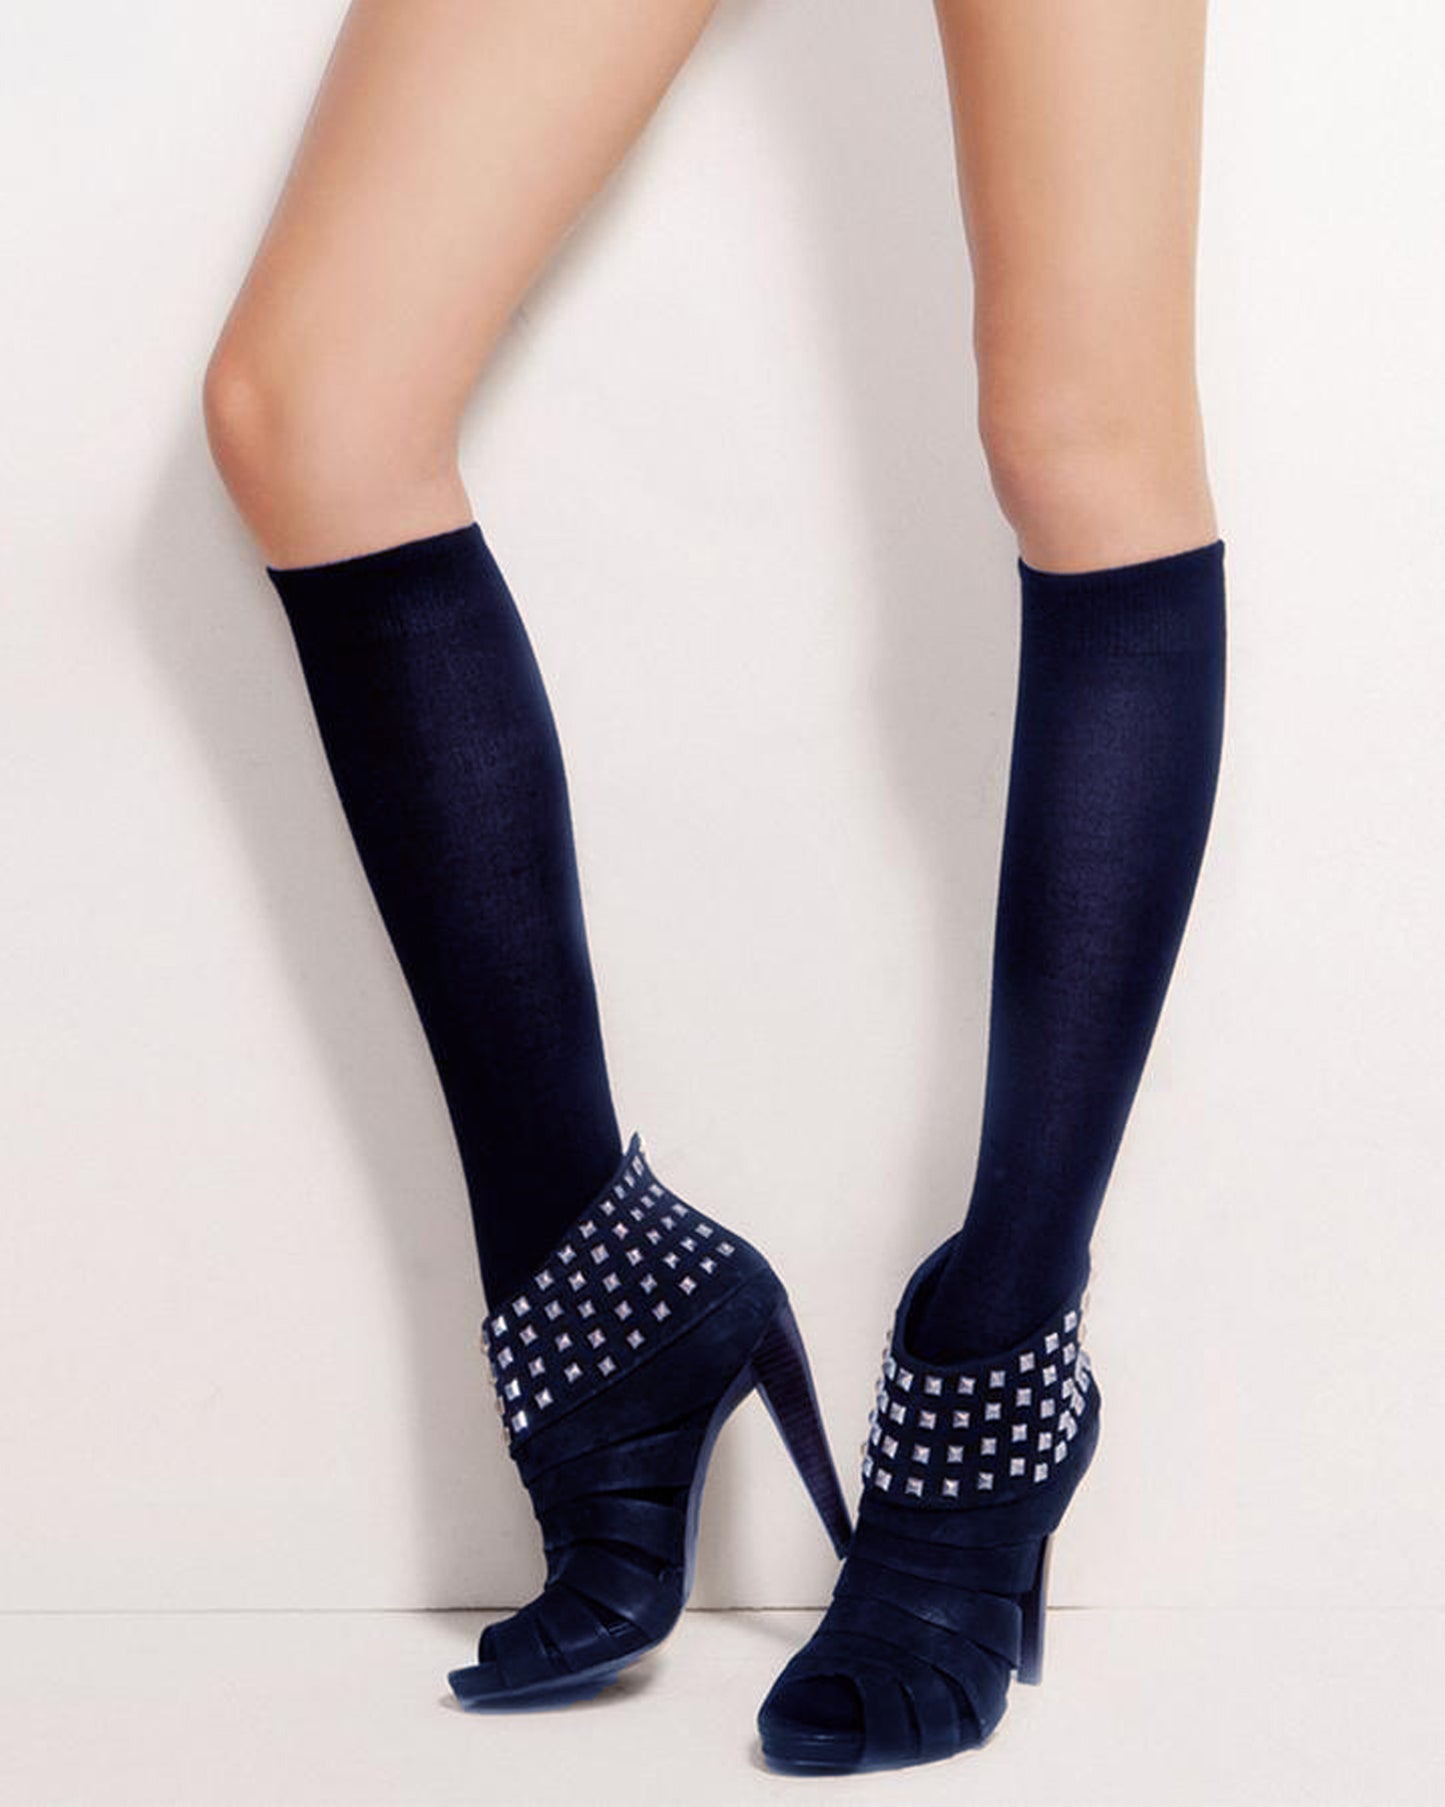 SiSi Soft Cotton Gambaletto -  Navy light weight cotton knee length socks with a deep elasticated cuff, shaped heel and flat toe seam.